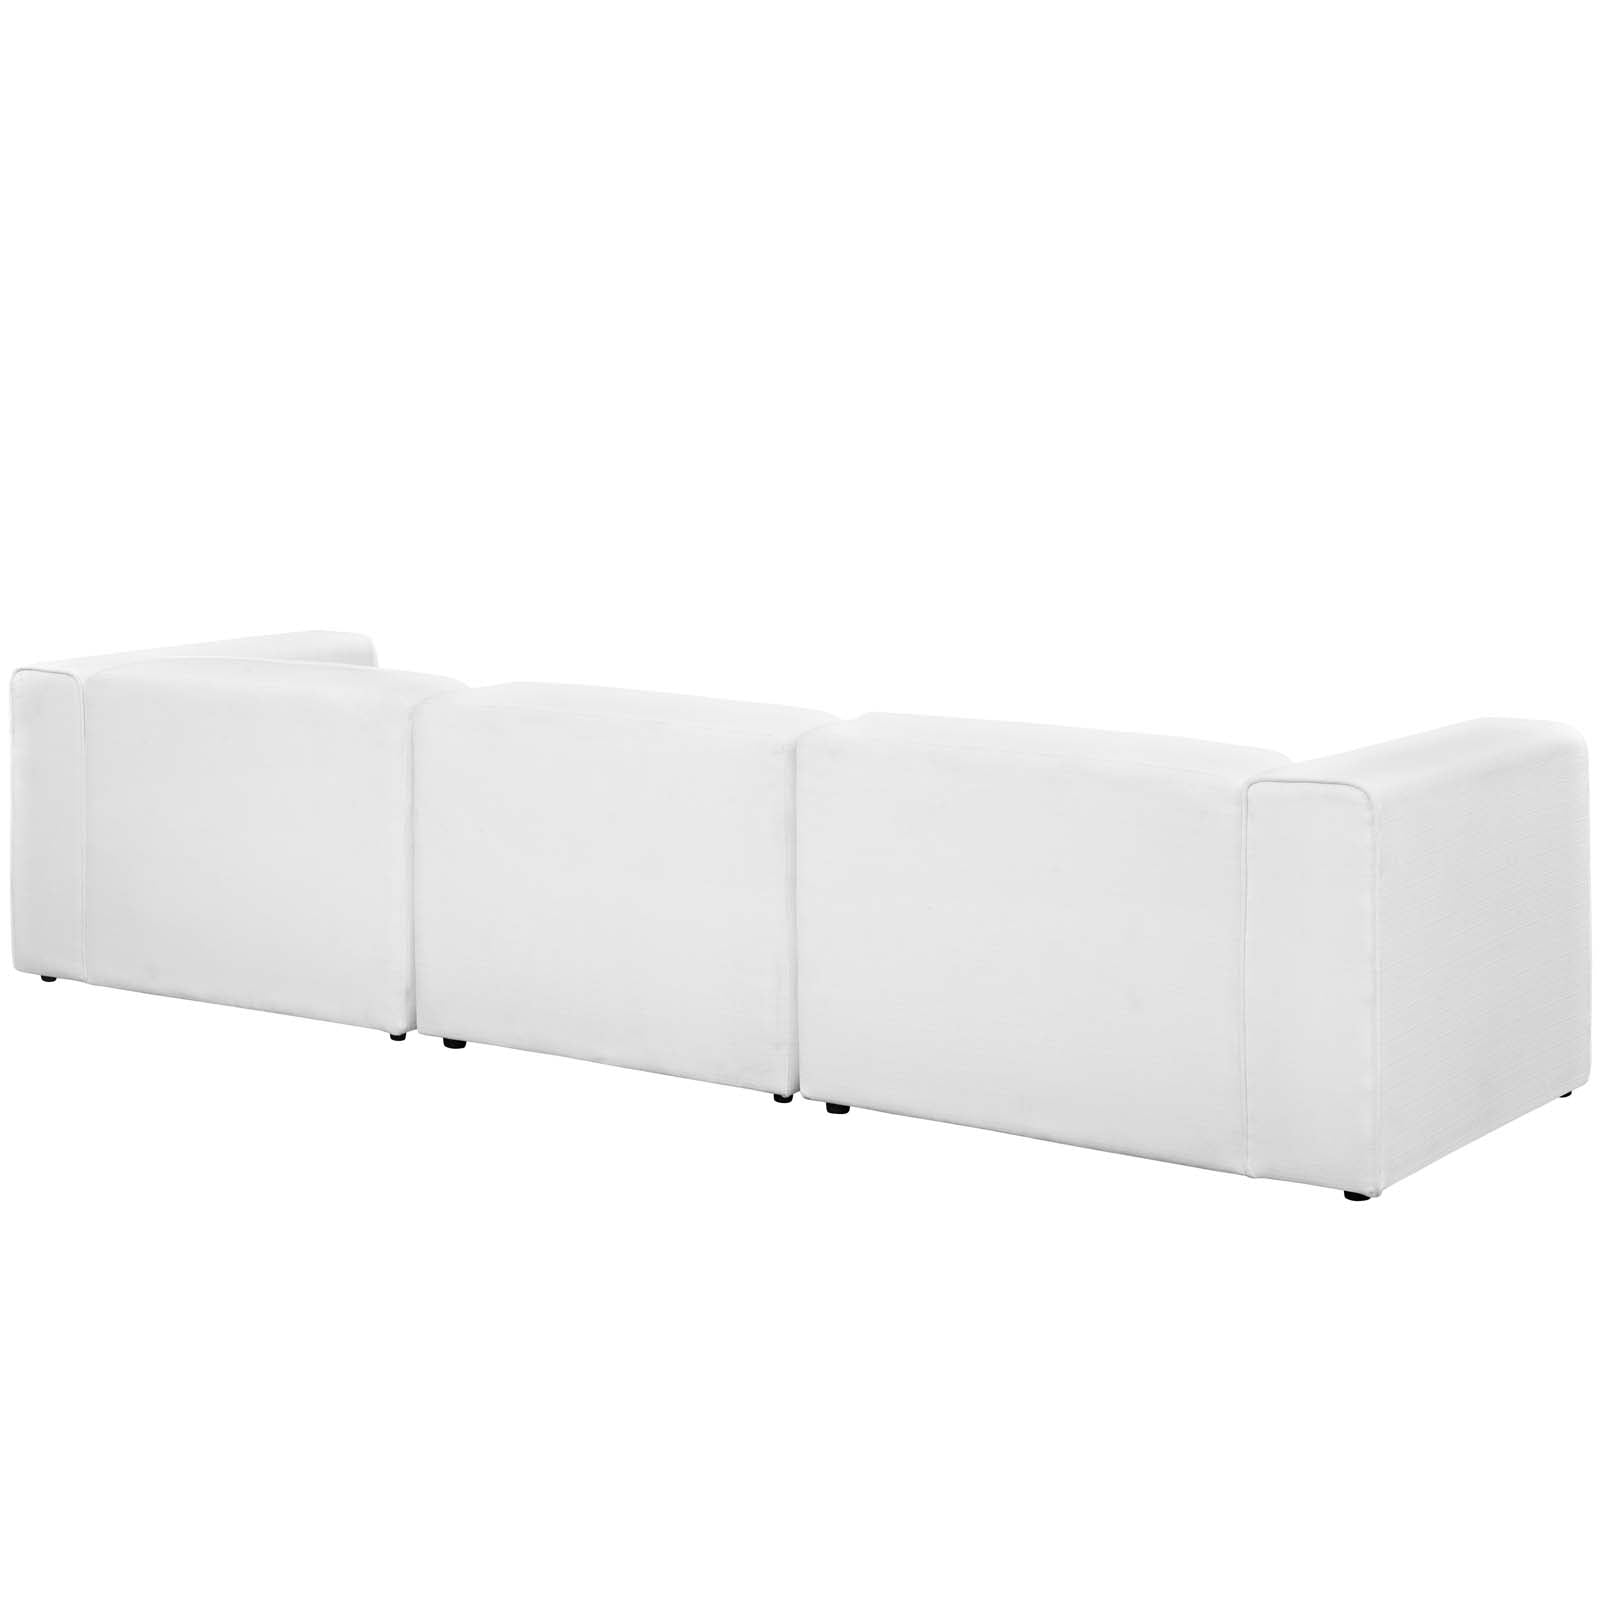 Modway Sectional Sofas - Mingle Upholstered Reversible Sectional Sofa White